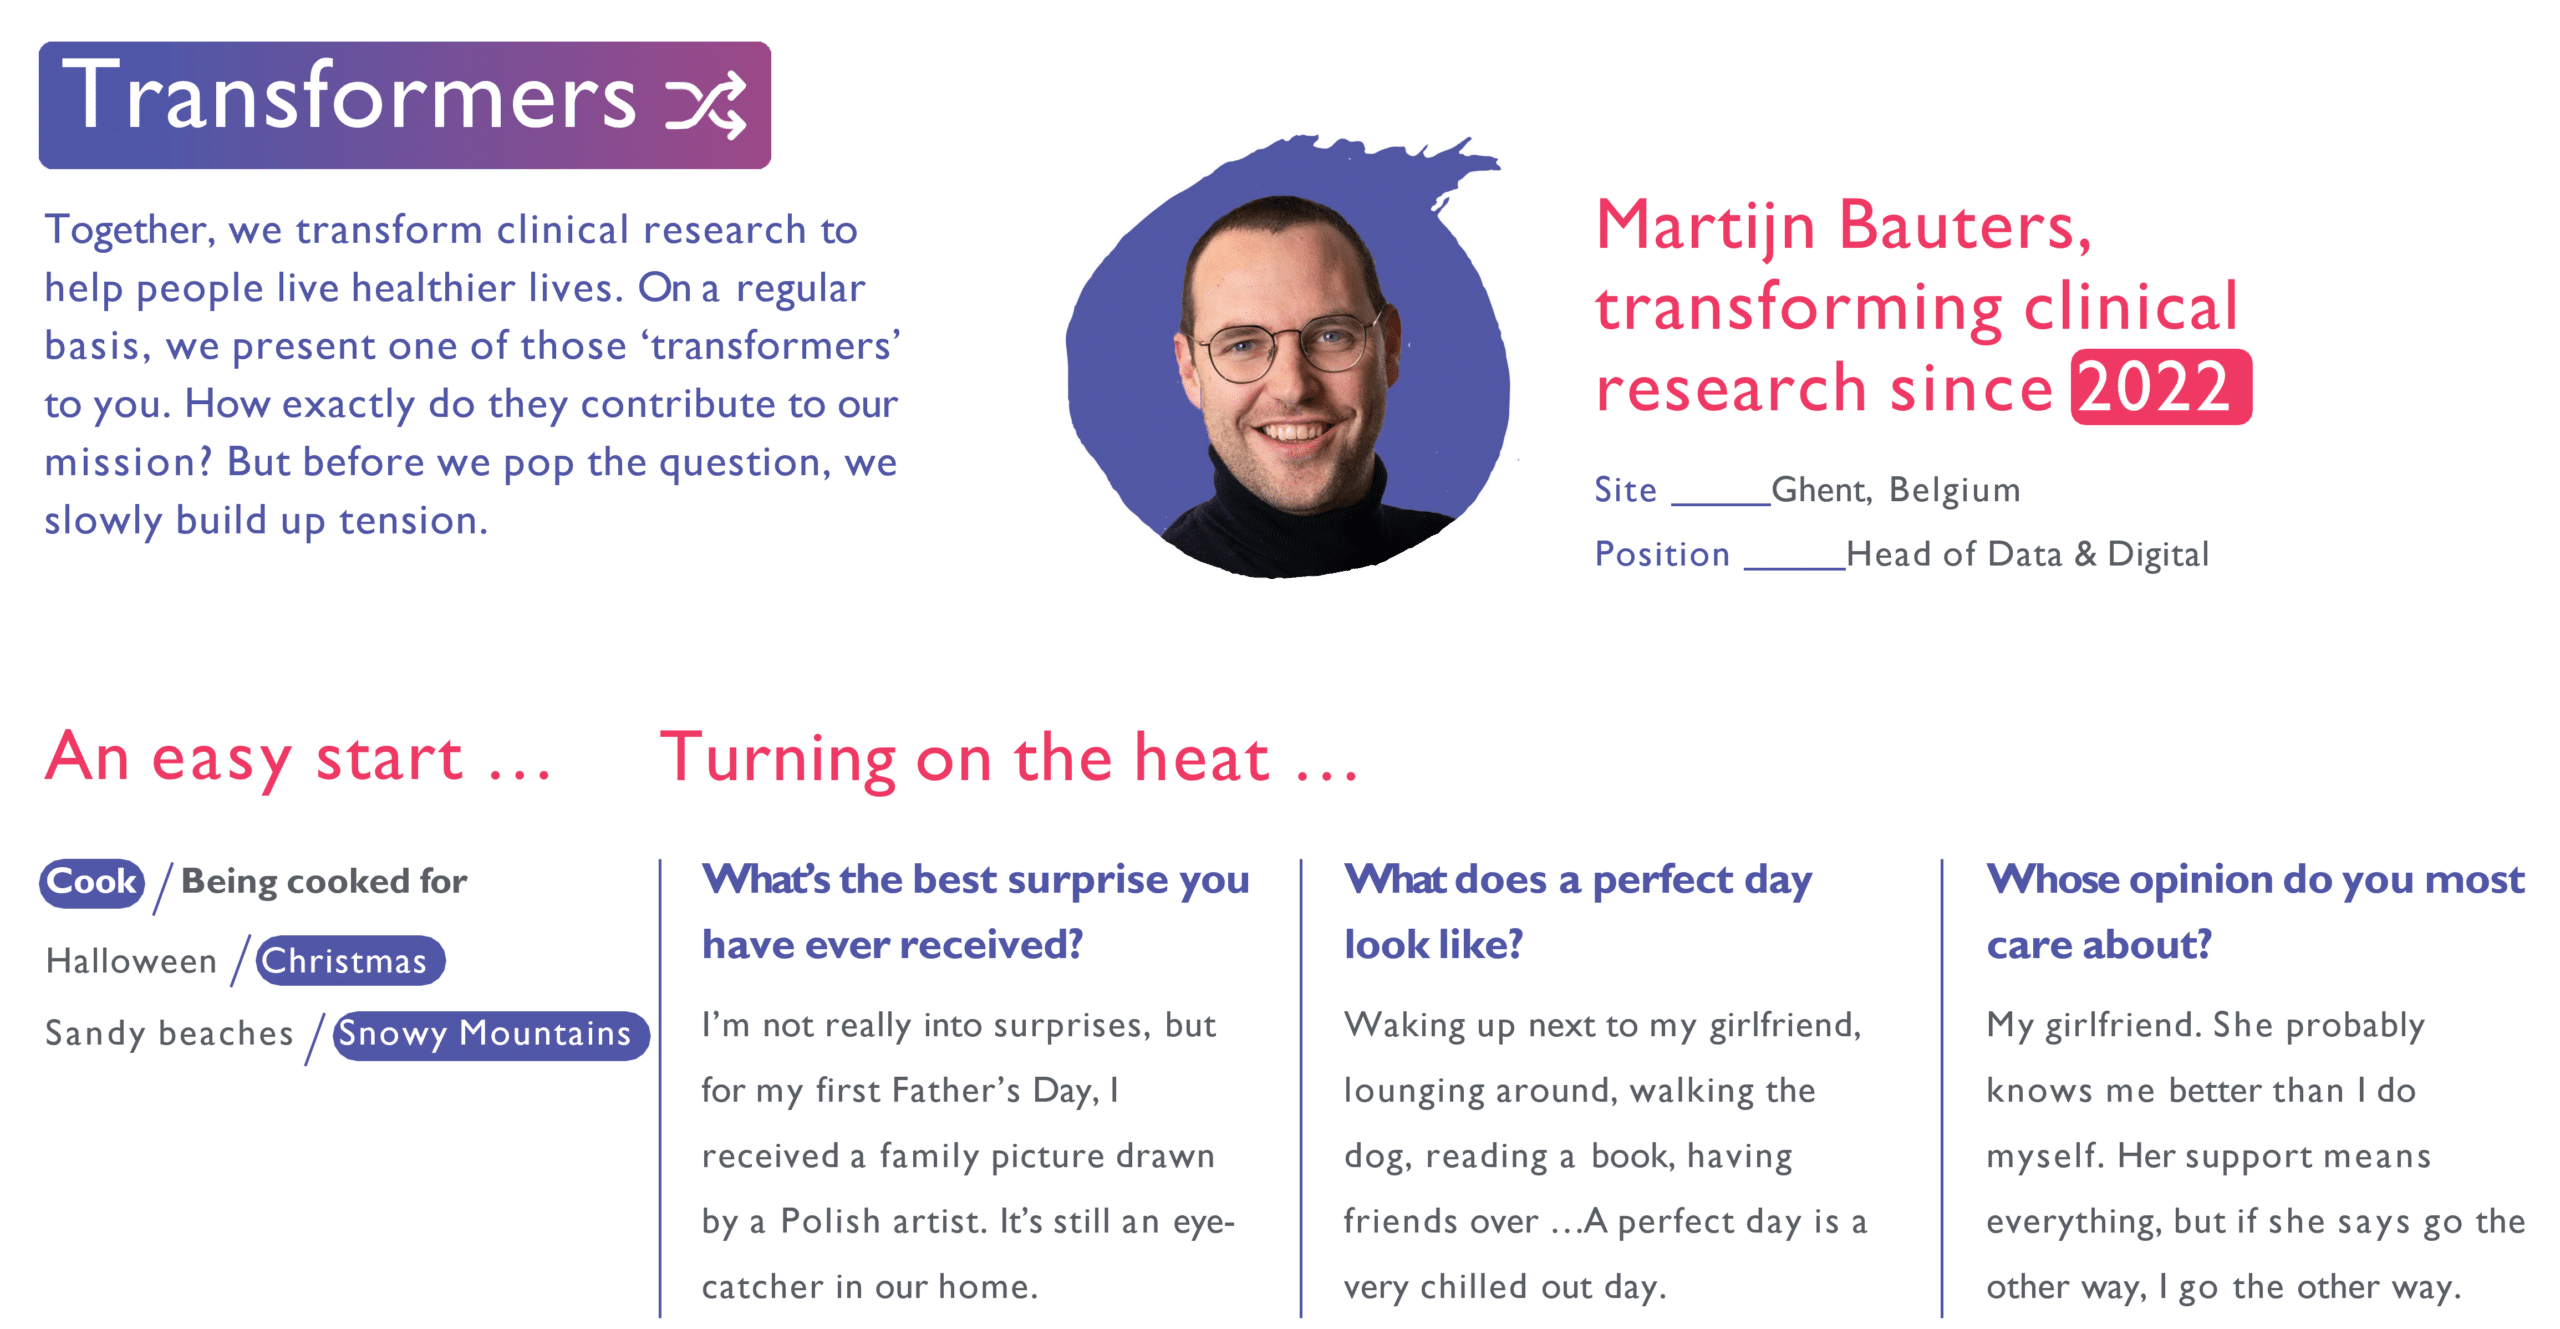 Martijn Bauters, transforming clinical research since 2022 - Cerba Research